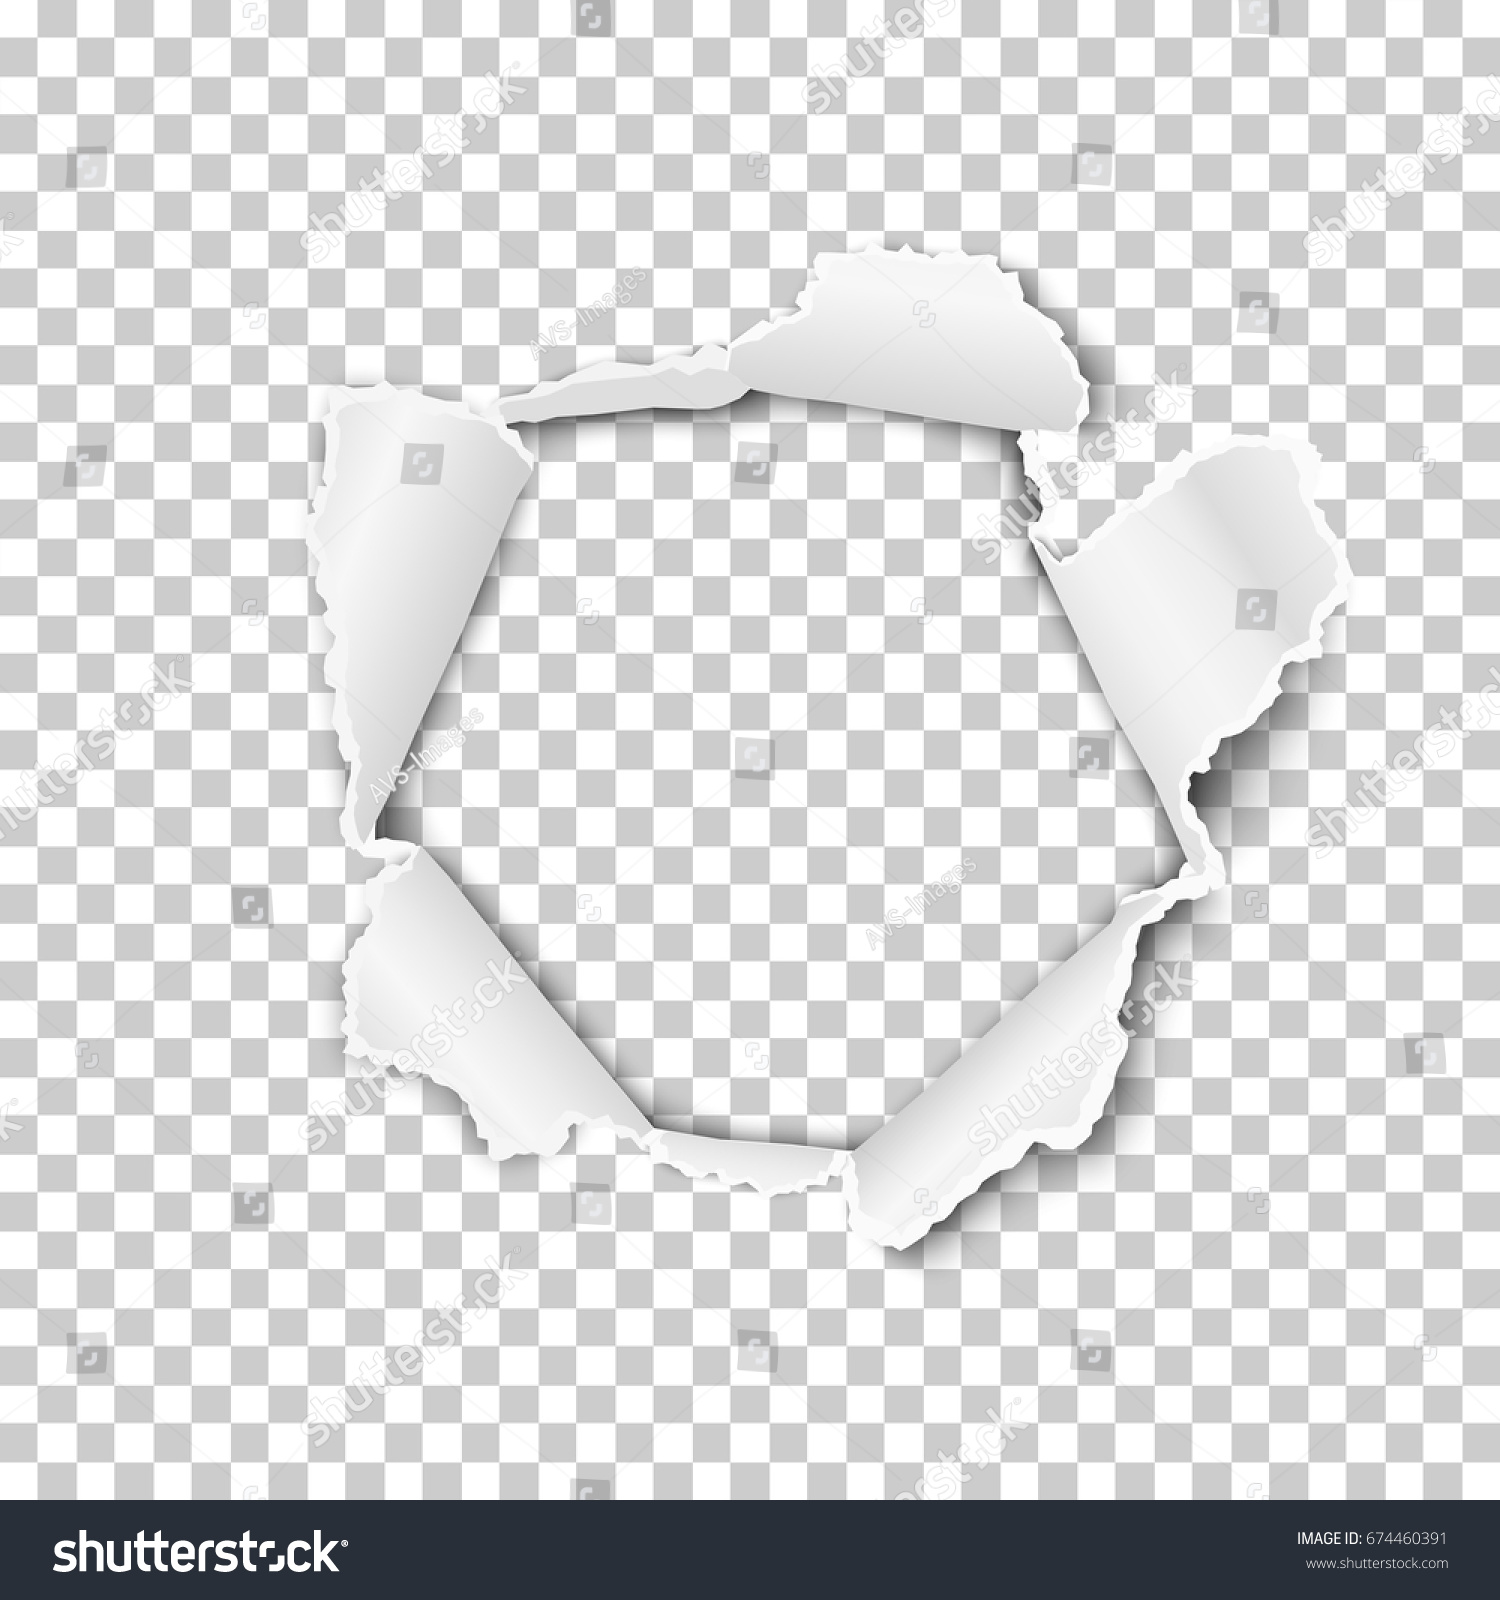 stock vector torn hole in the sheet of paper on a transparent background vector template design 674460391